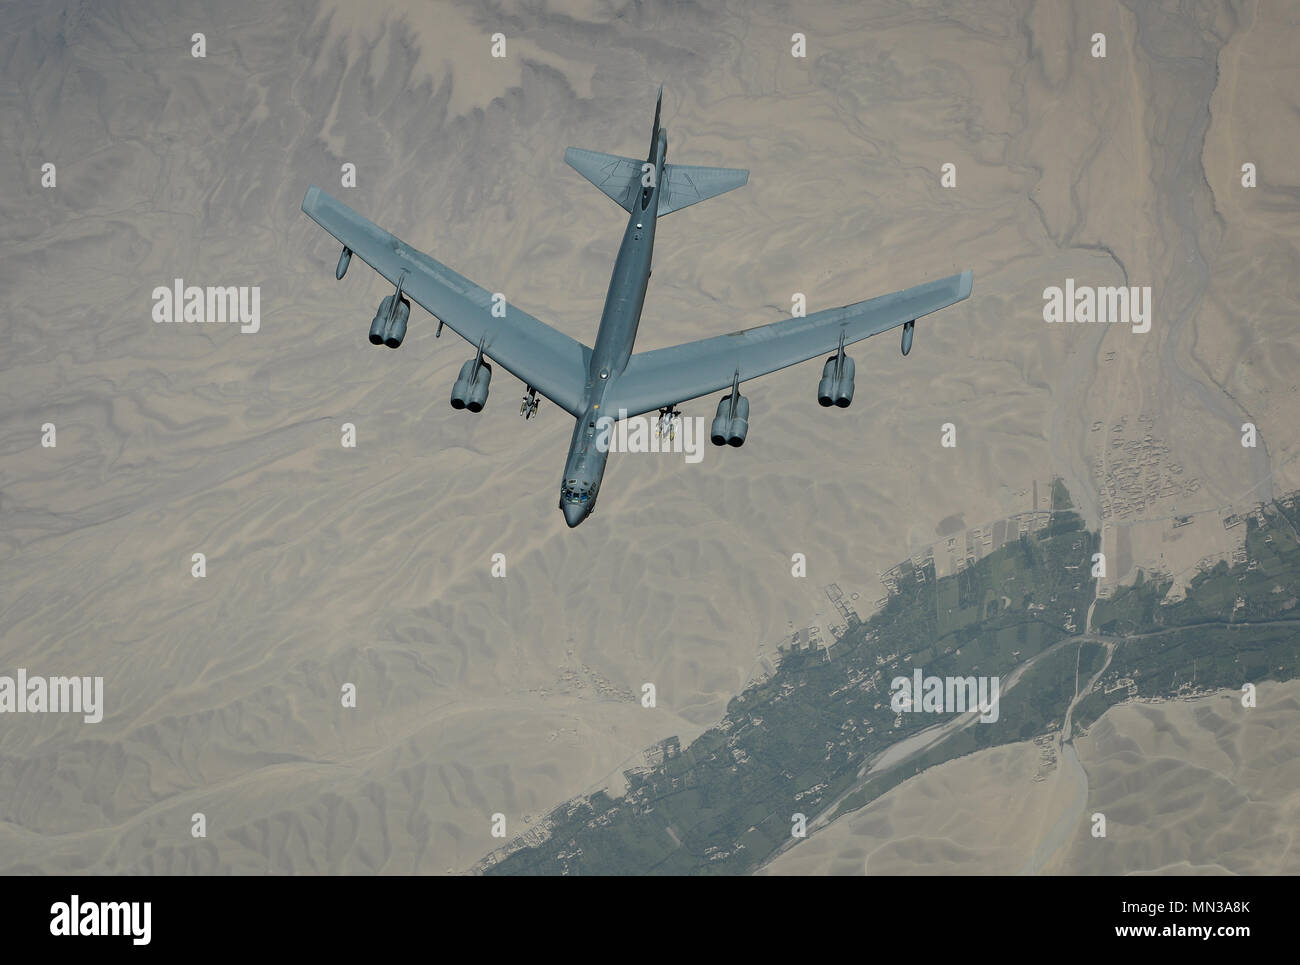 A U.S. Air Force B-52 Stratofortress flies above Southwest Asia Aug. 28, 2017. Despite being in the Air Force inventory for more than 50 years, B-52s continue to provide precision-guided weapons capabilities to Operation Inherent Resolve. The aircraft's payload capacity of 70,000 pounds can include gravity bombs, cluster bombs, precision-guided missiles and Joint Direct Attack Munitions. (U.S. Air Force photo by Staff Sgt. Michael Battles) Stock Photo